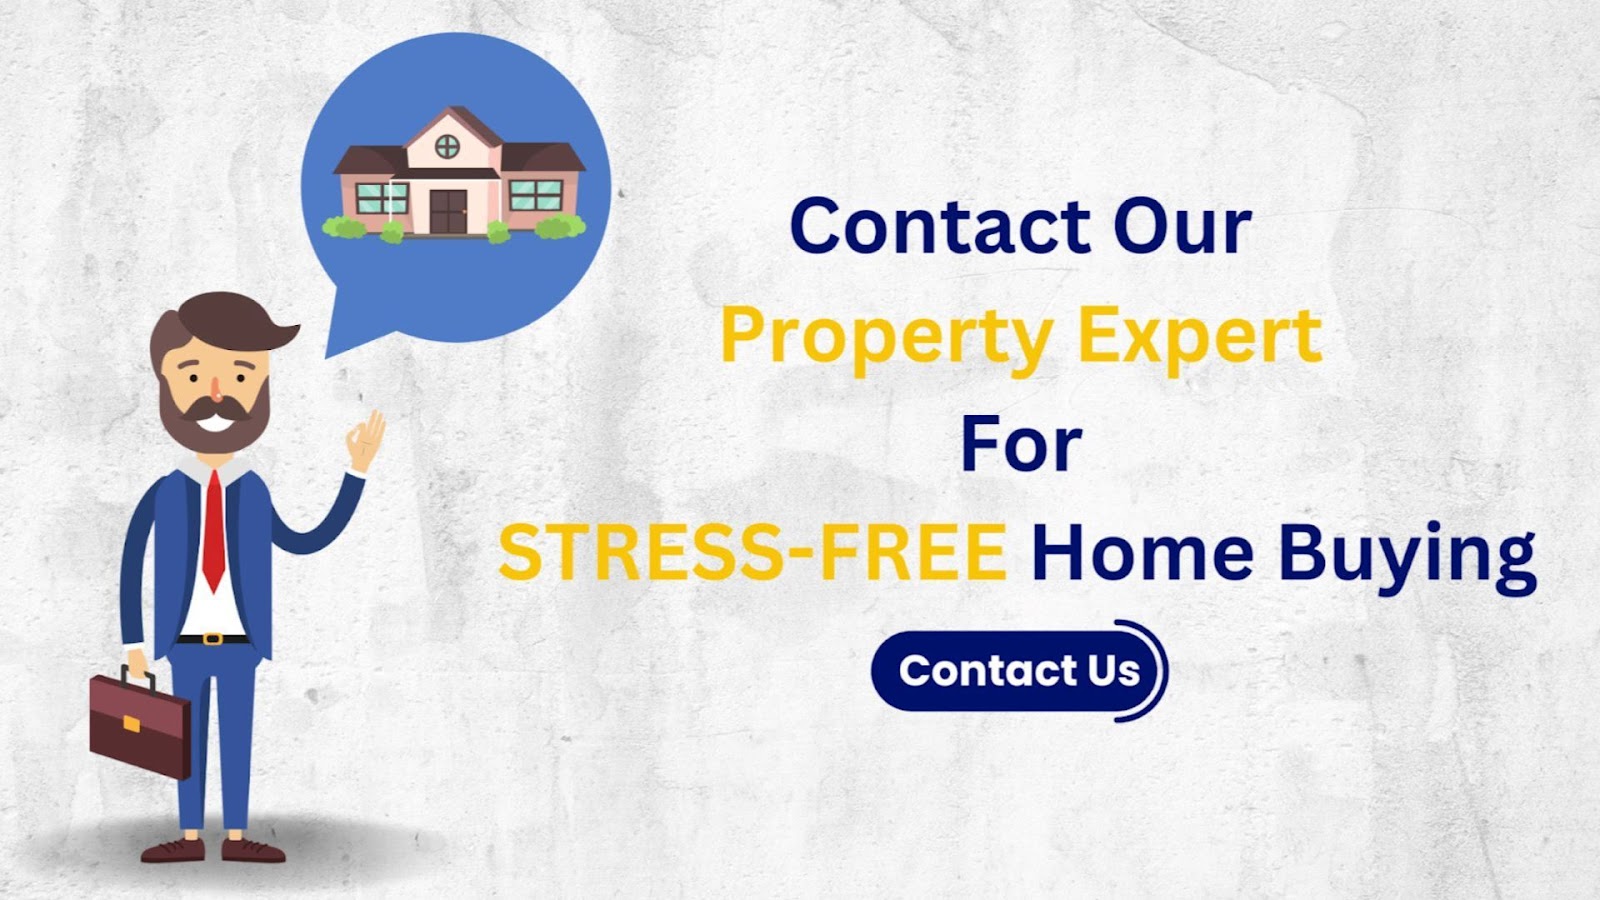 For advice on purchasing and selling real estate, get in touch with the PropertyCloud property expert.